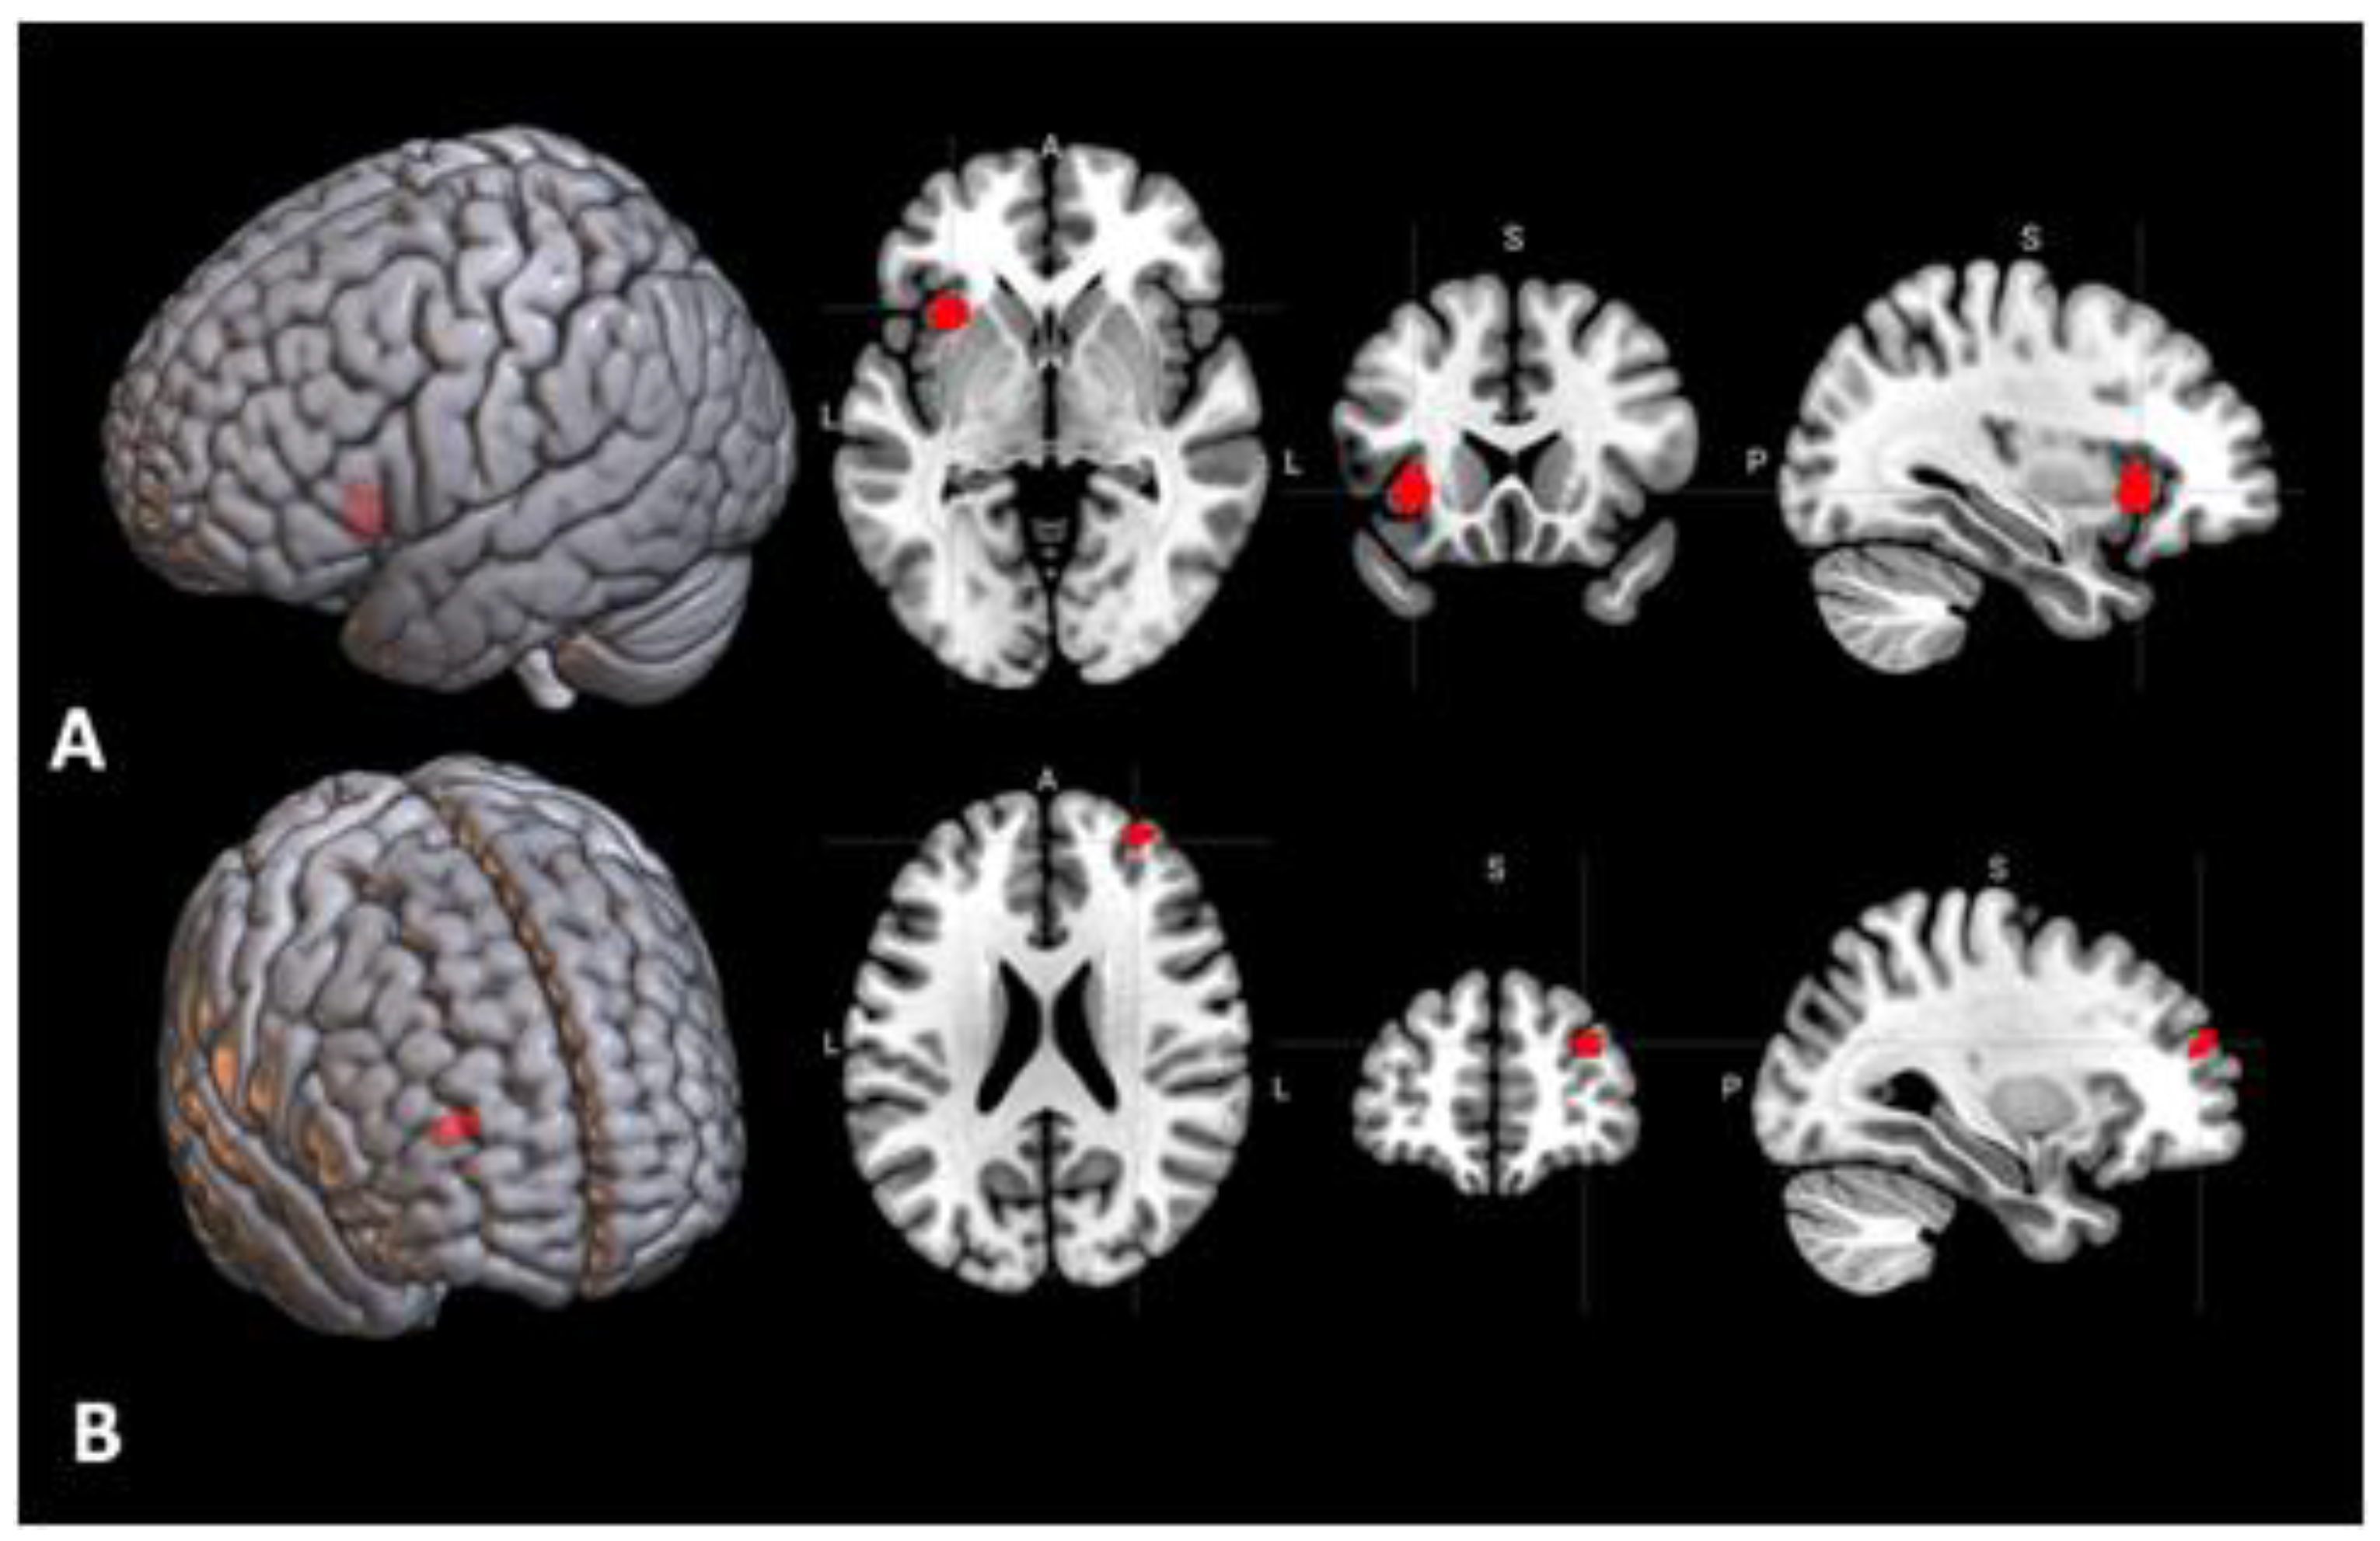 Behavioral Sciences Free Full Text Brain Activations And Functional Connectivity Patterns Associated With Insight Based And Analytical Anagram Solving Html